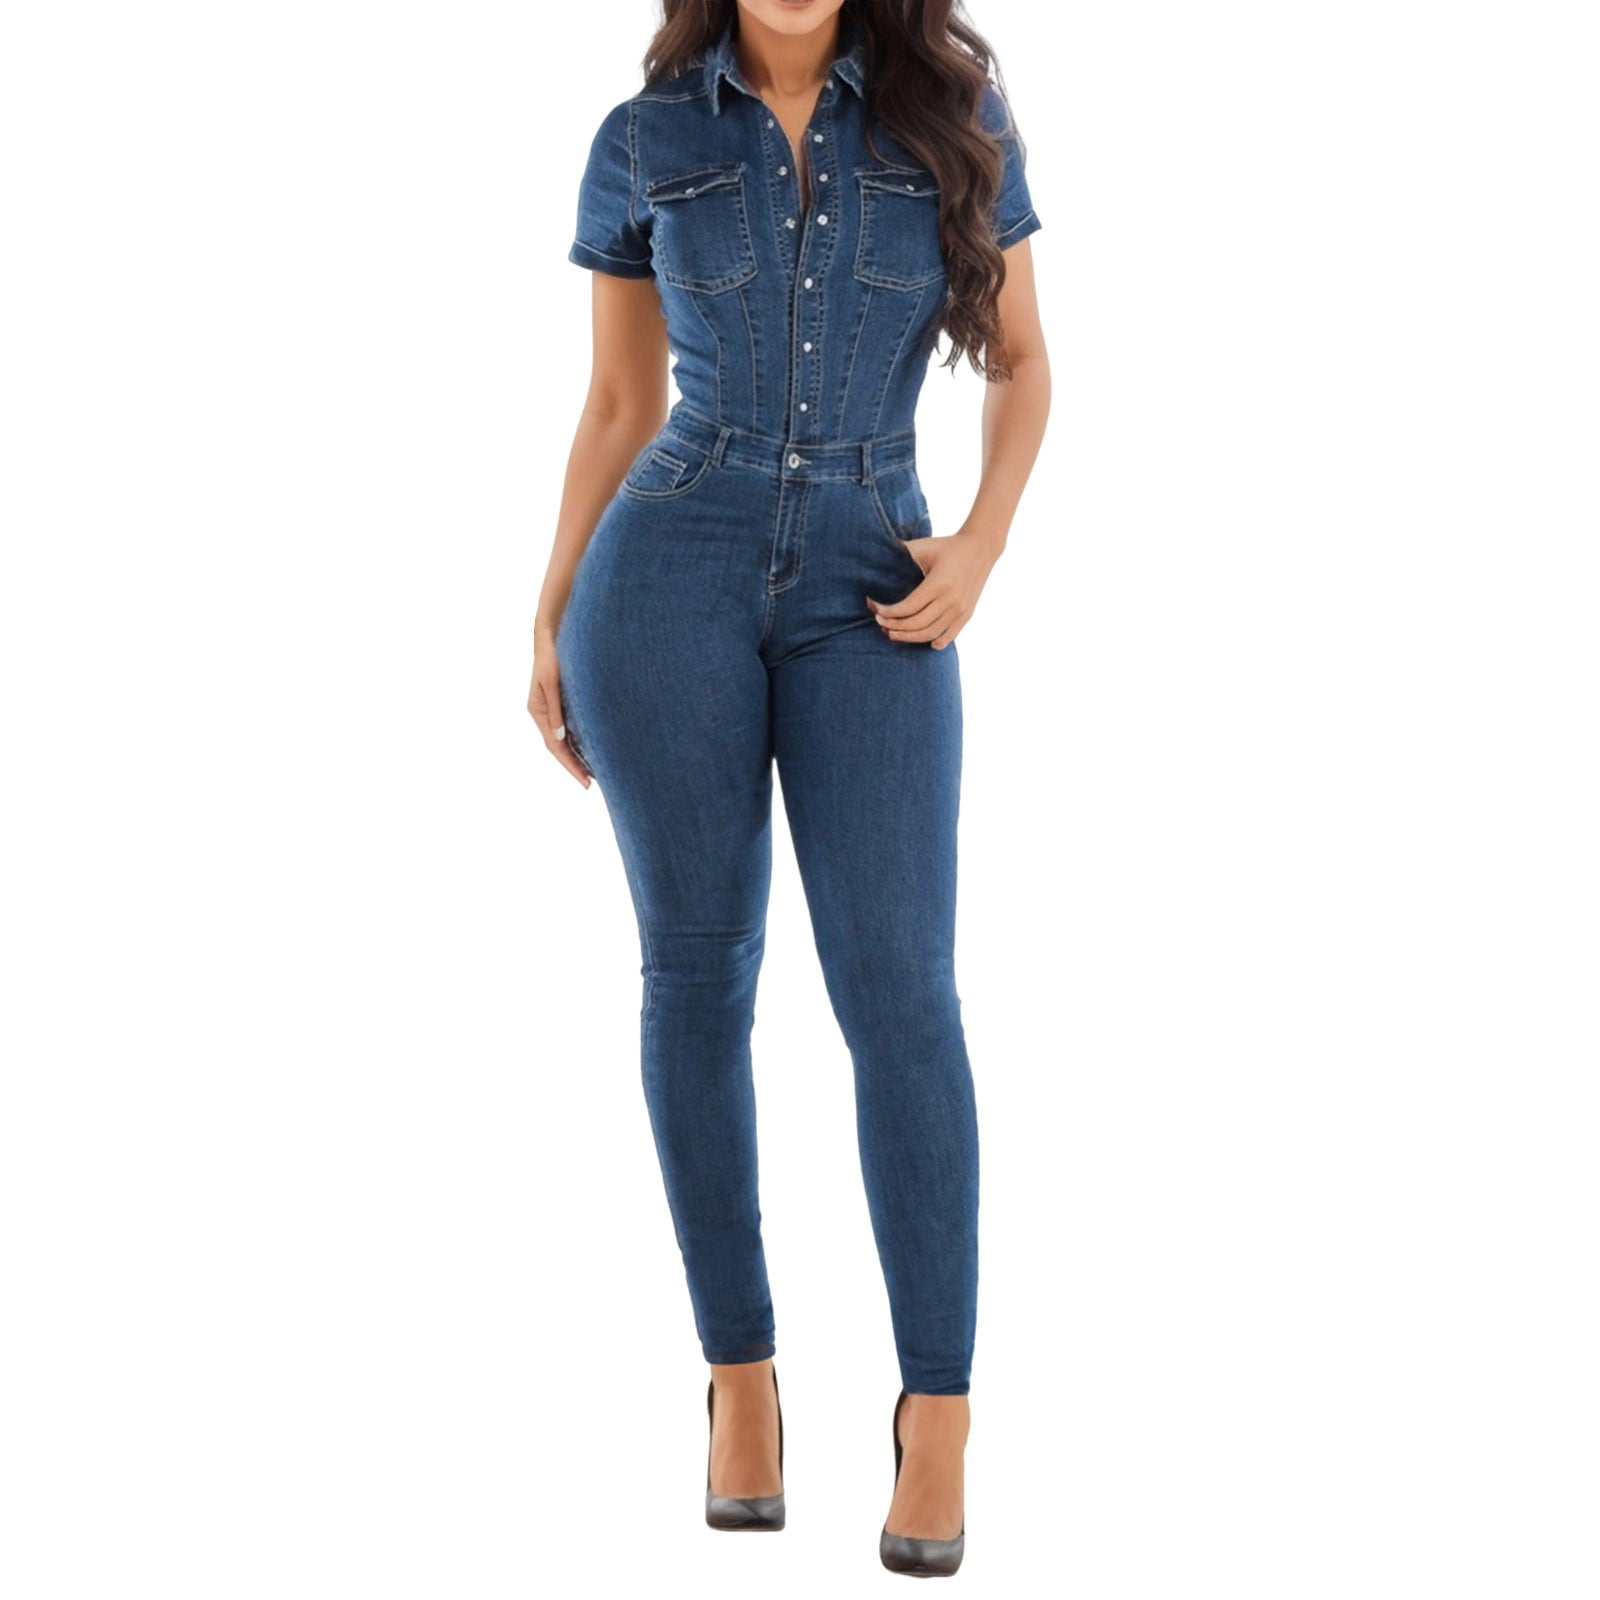 Fauean Rompers for Women Button Down Slim Fit Lapel Full length Jeans ...